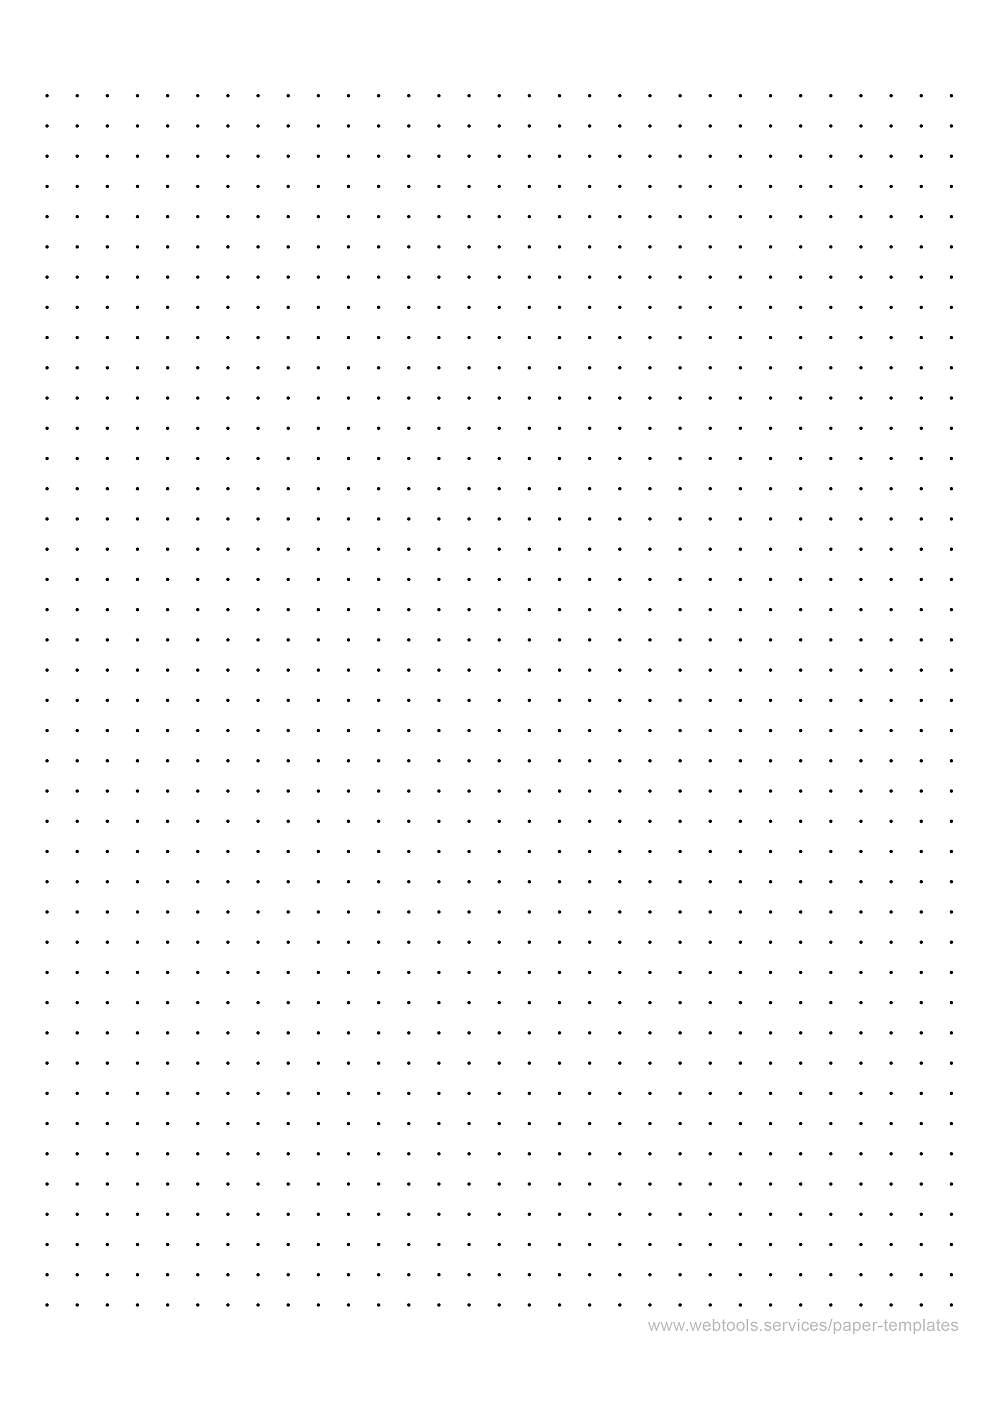 dotted paper with four dots per inch